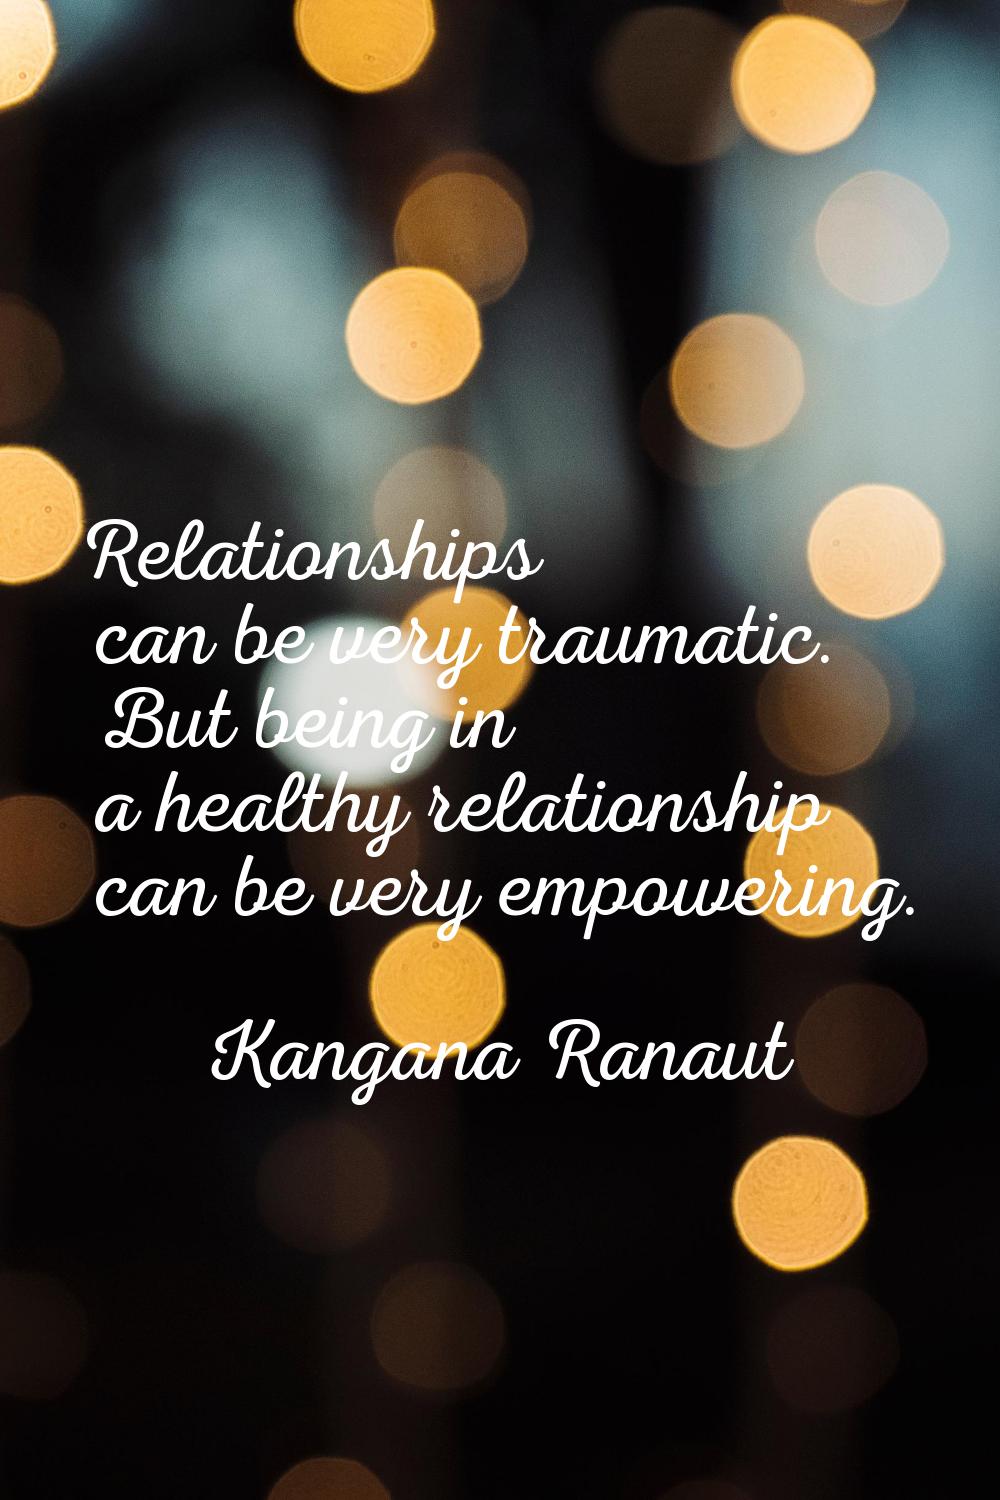 Relationships can be very traumatic. But being in a healthy relationship can be very empowering.